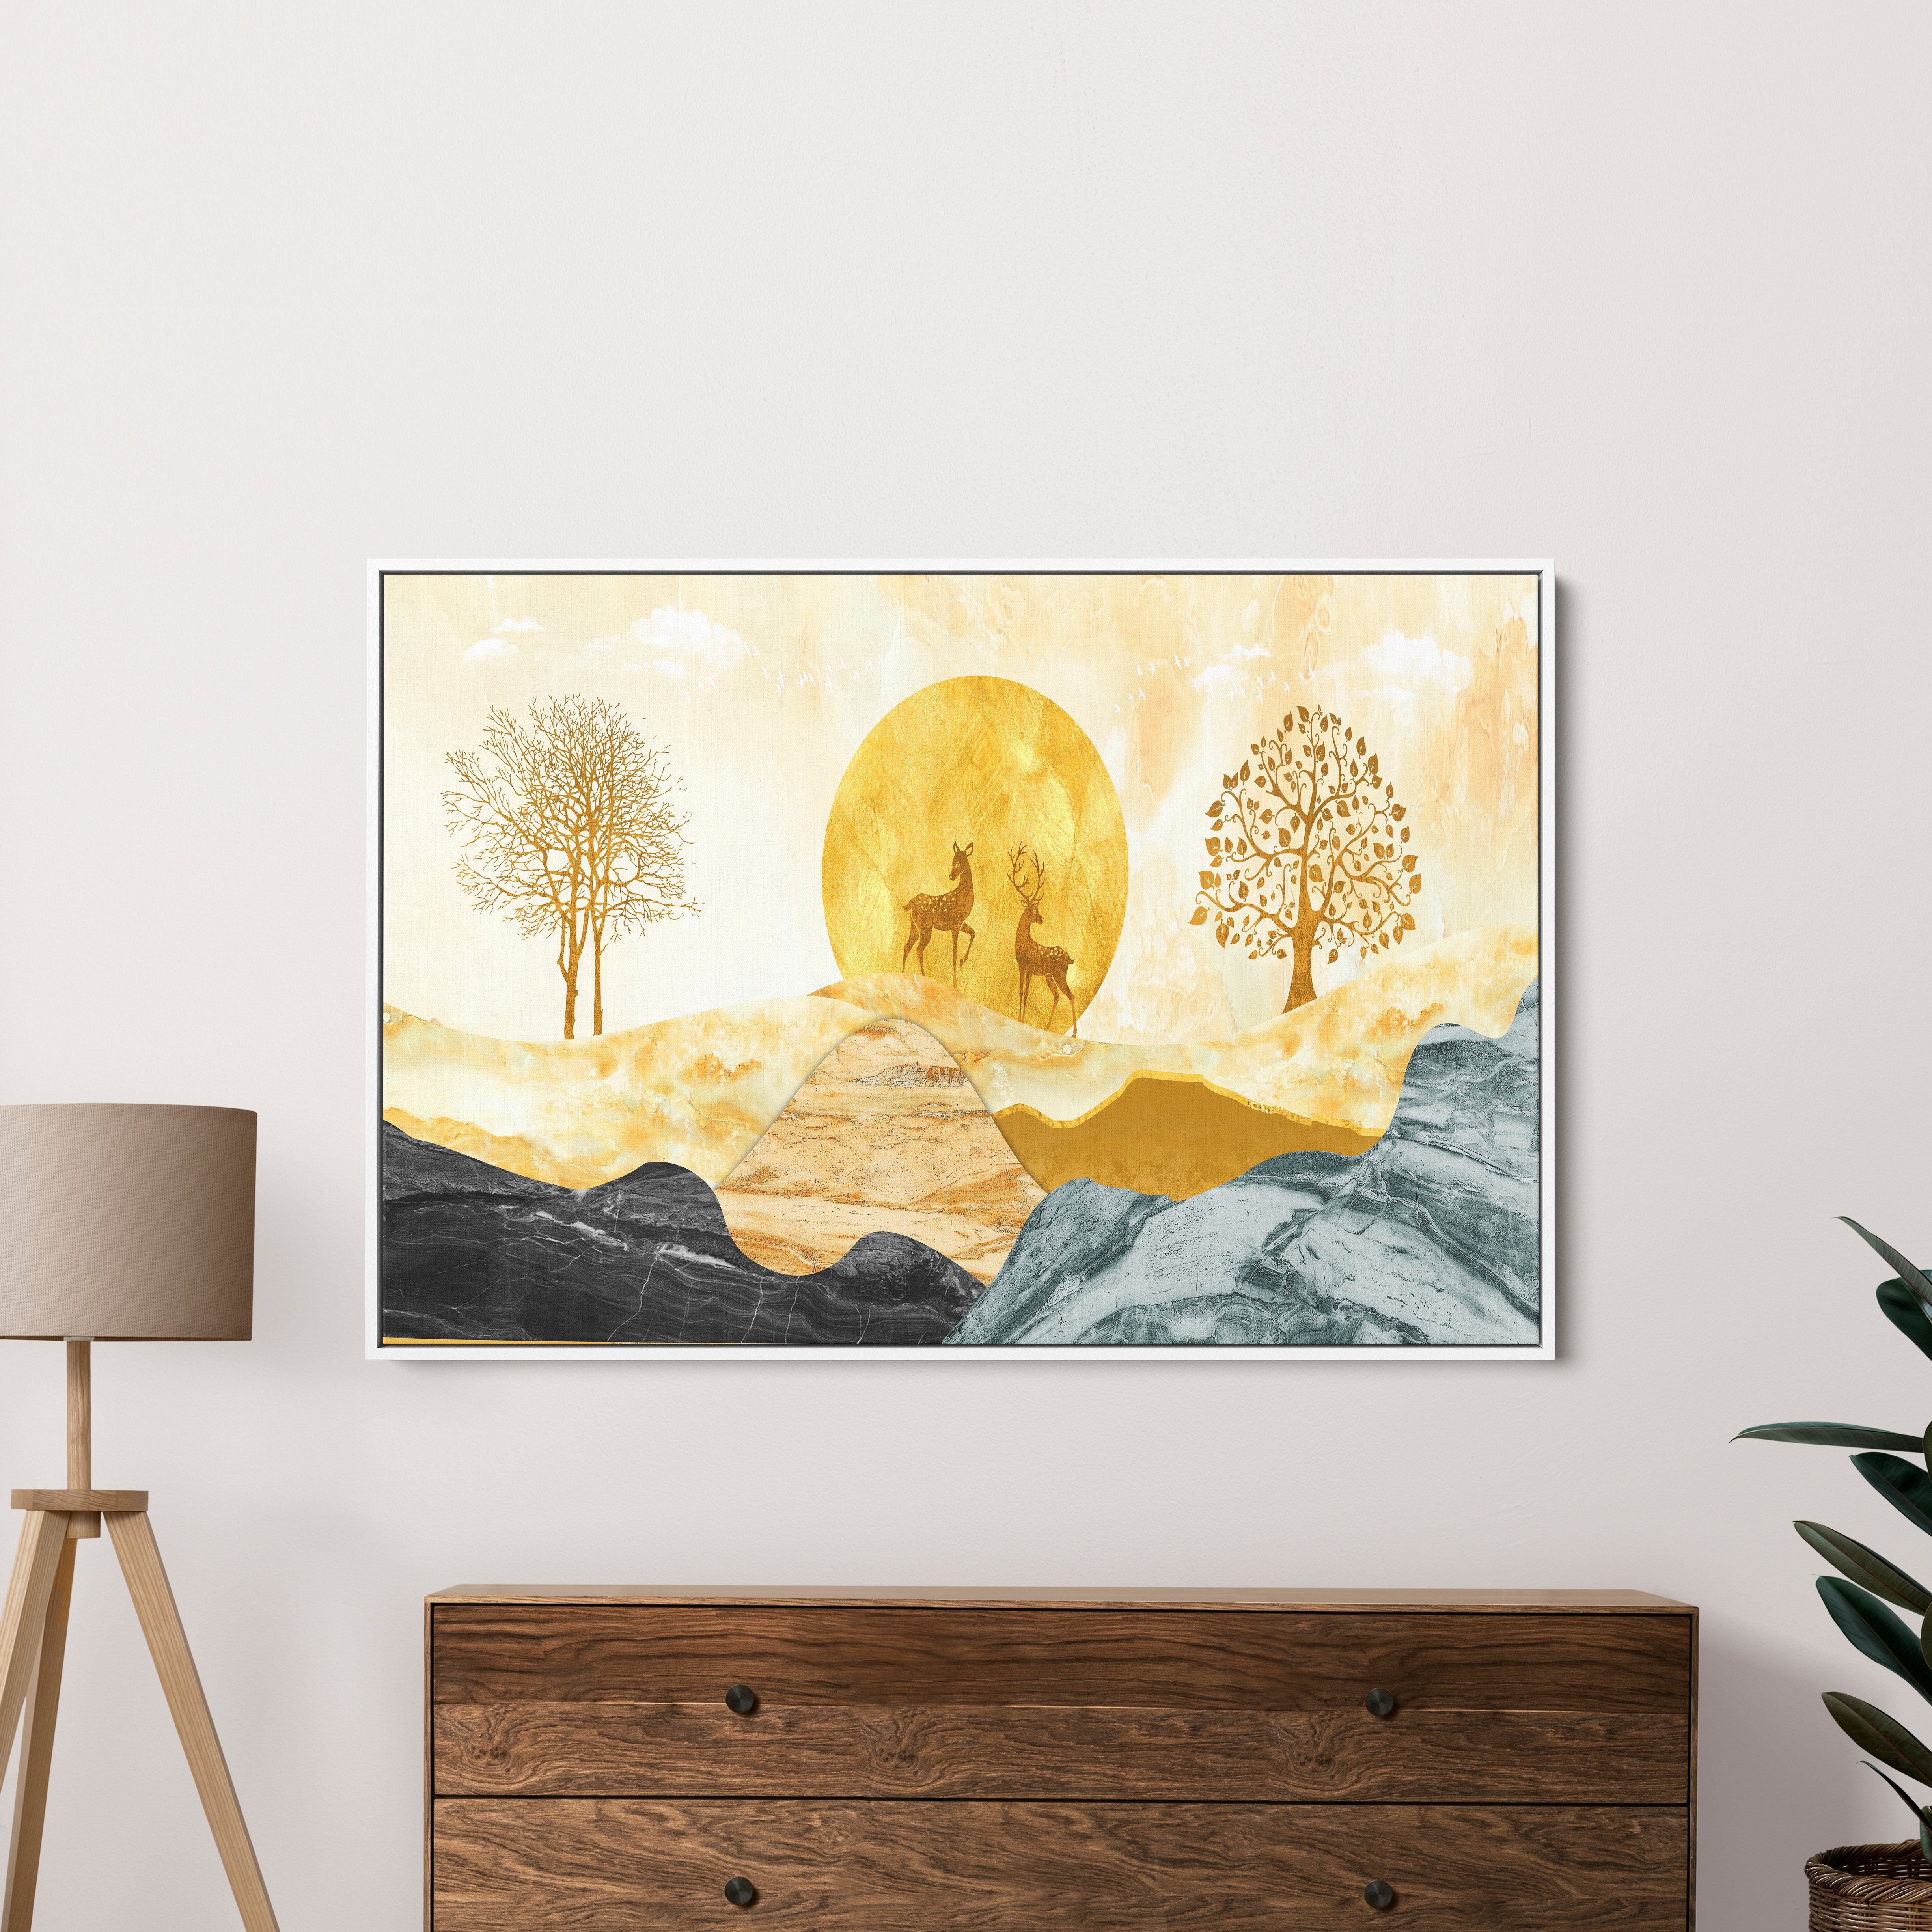 Golden And Black Mountains Sun With Deer Canvas Wall Painting